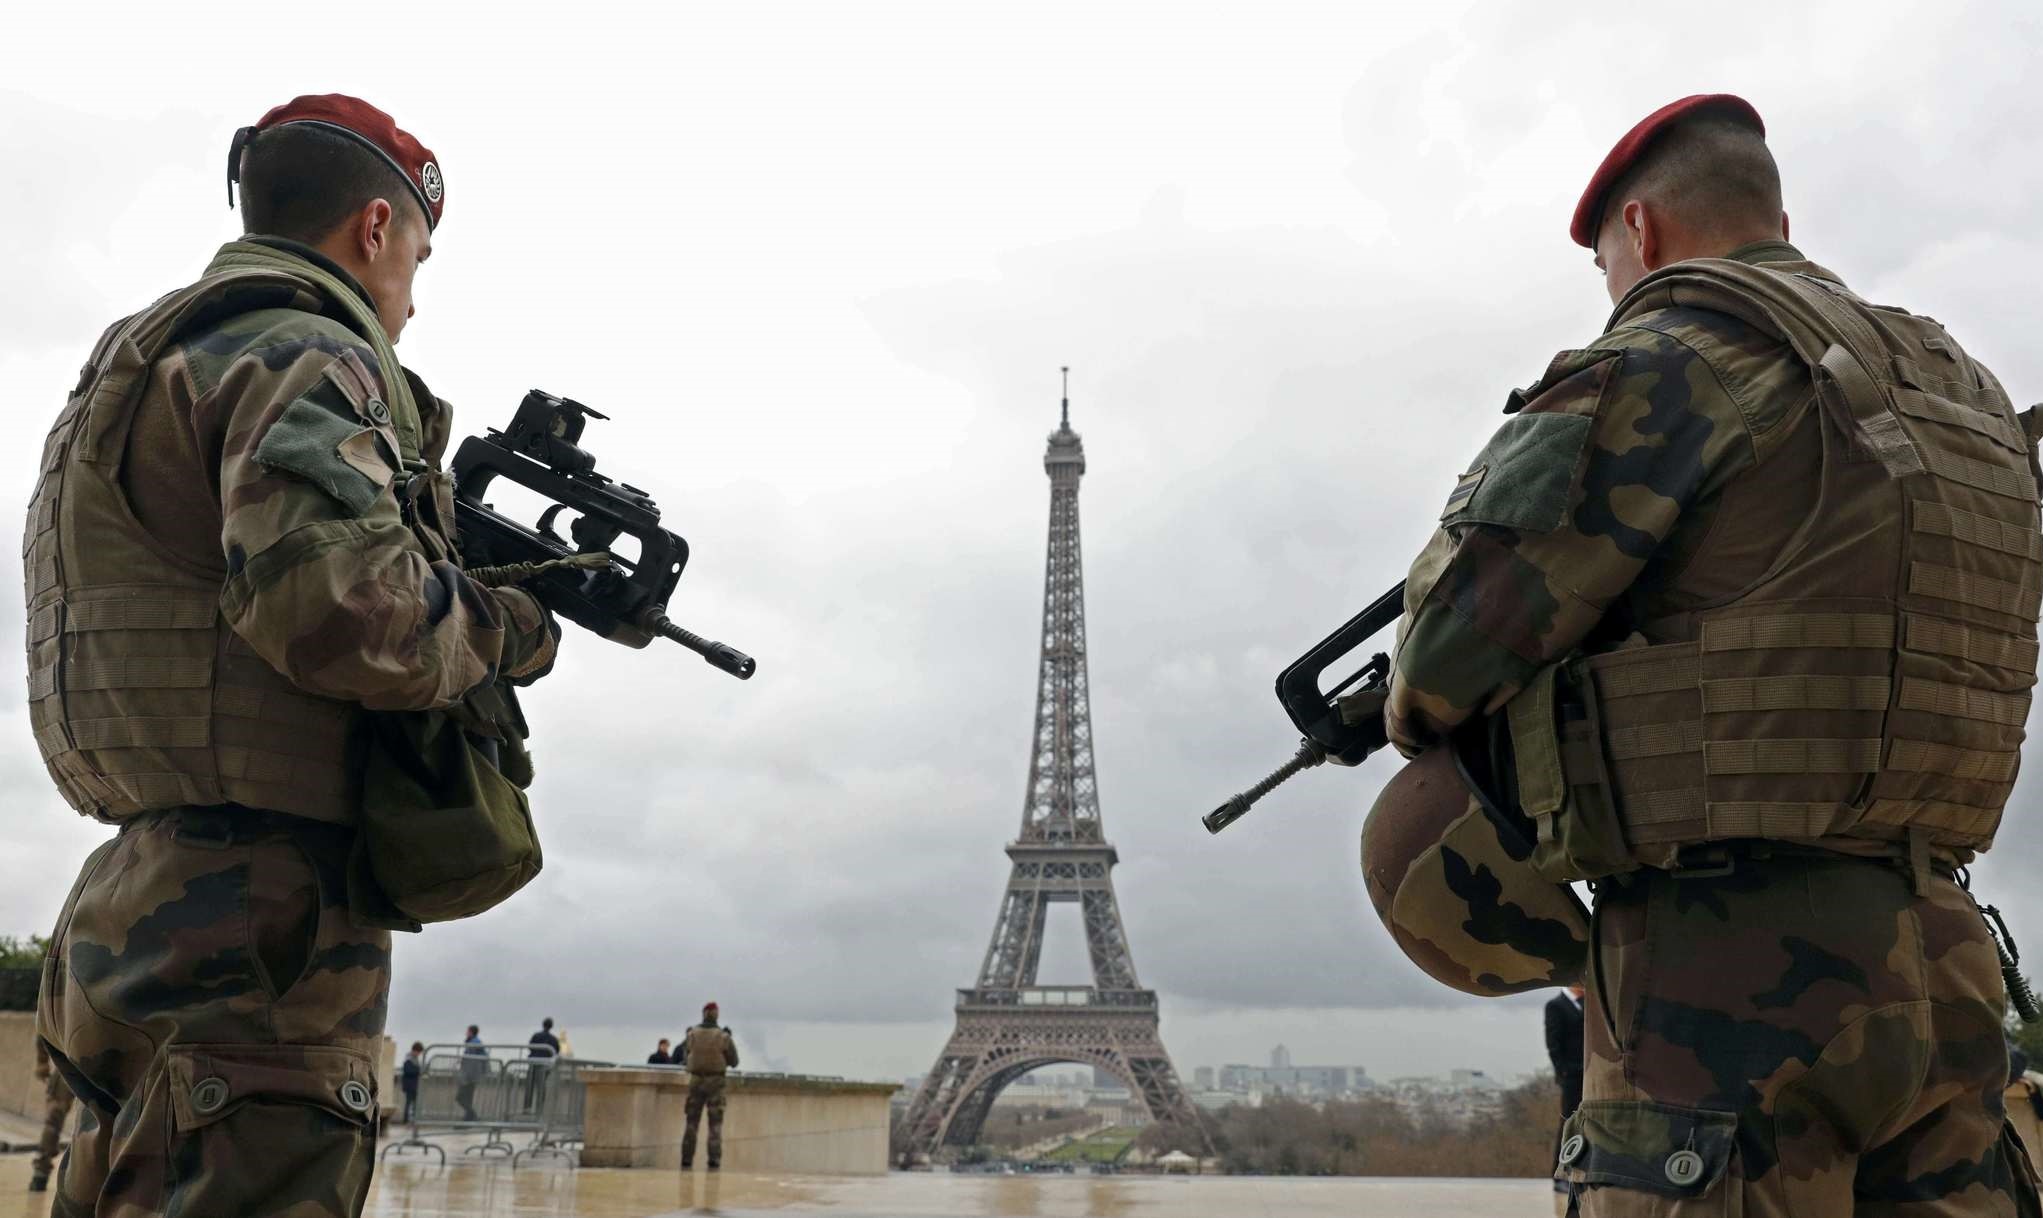 French army paratroopers patrol near the Eiffel tower in Paris, France, March 30, 2016 (Reuters Photo)